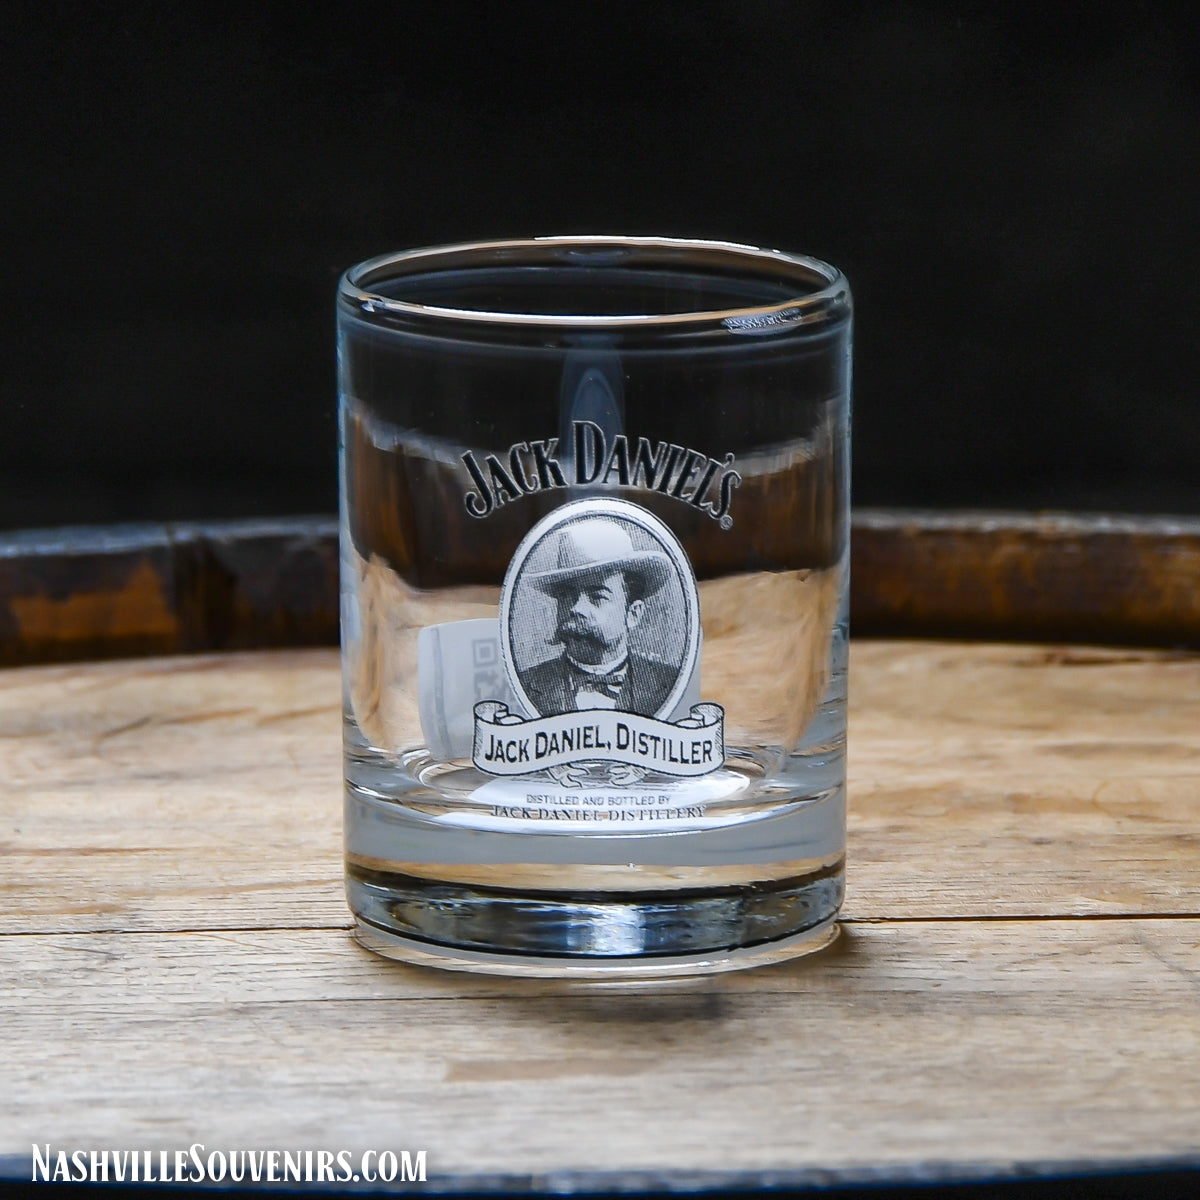 Officially licensed Jack Daniels Cameo Shot Glass with Mr. Jack image. Get yours today with FREE SHIPPING on all US orders over $75!